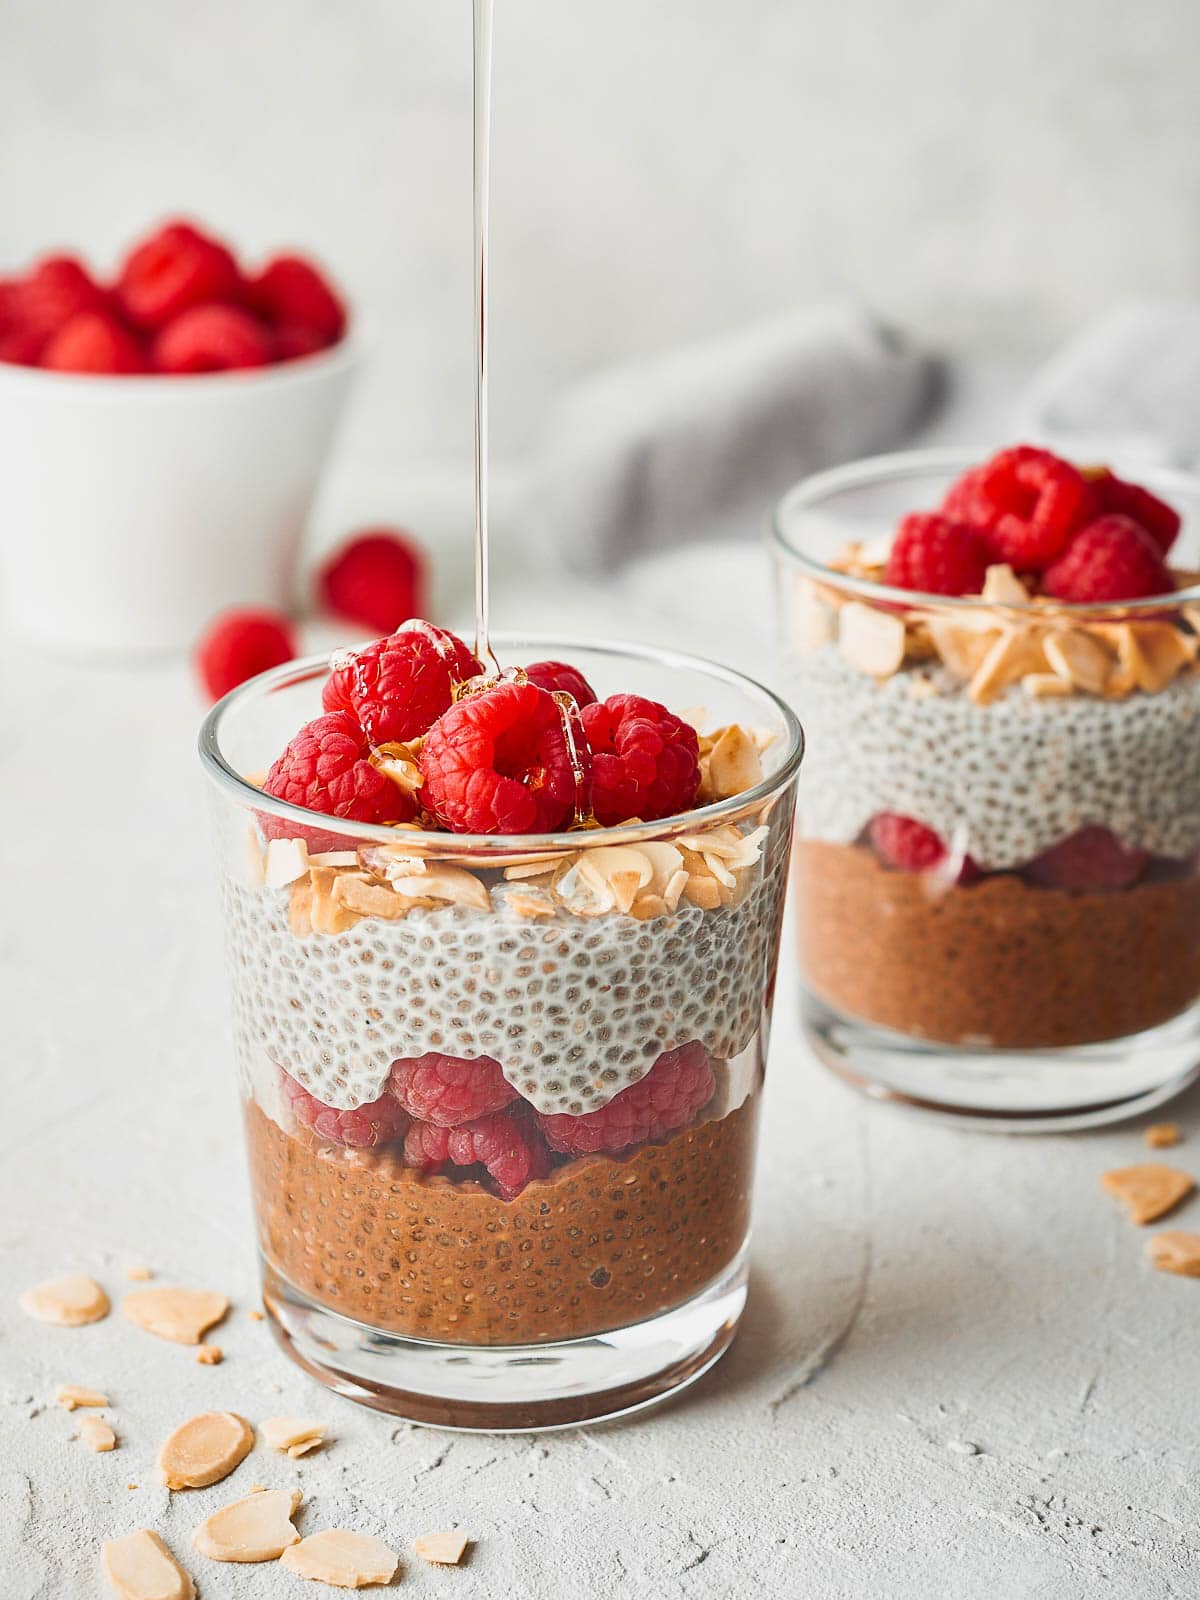 Two glasses of chia seed parfait, a small bowl of raspberries, with a drizzle of agave